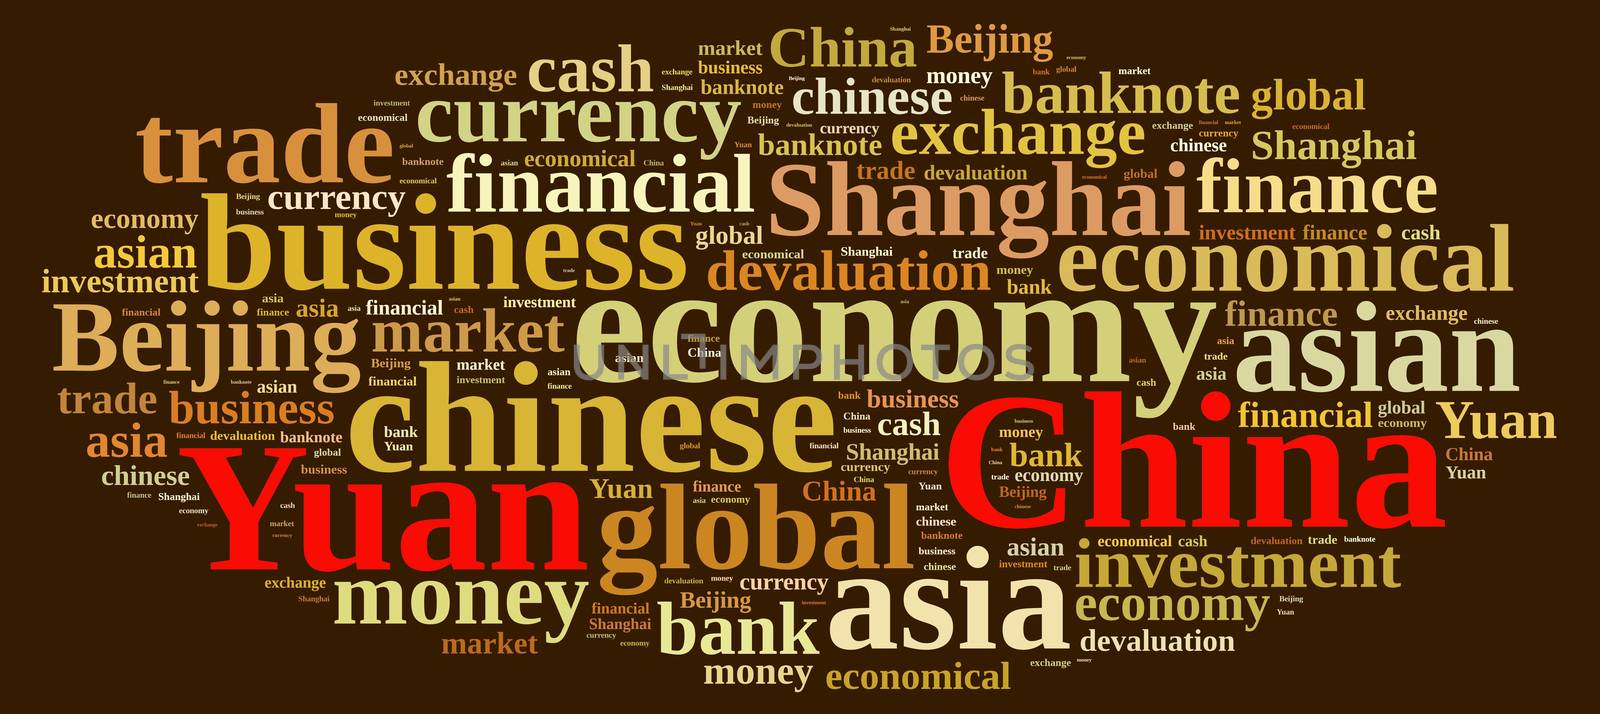 Illustration with word cloud on the Chinese currency Yuan